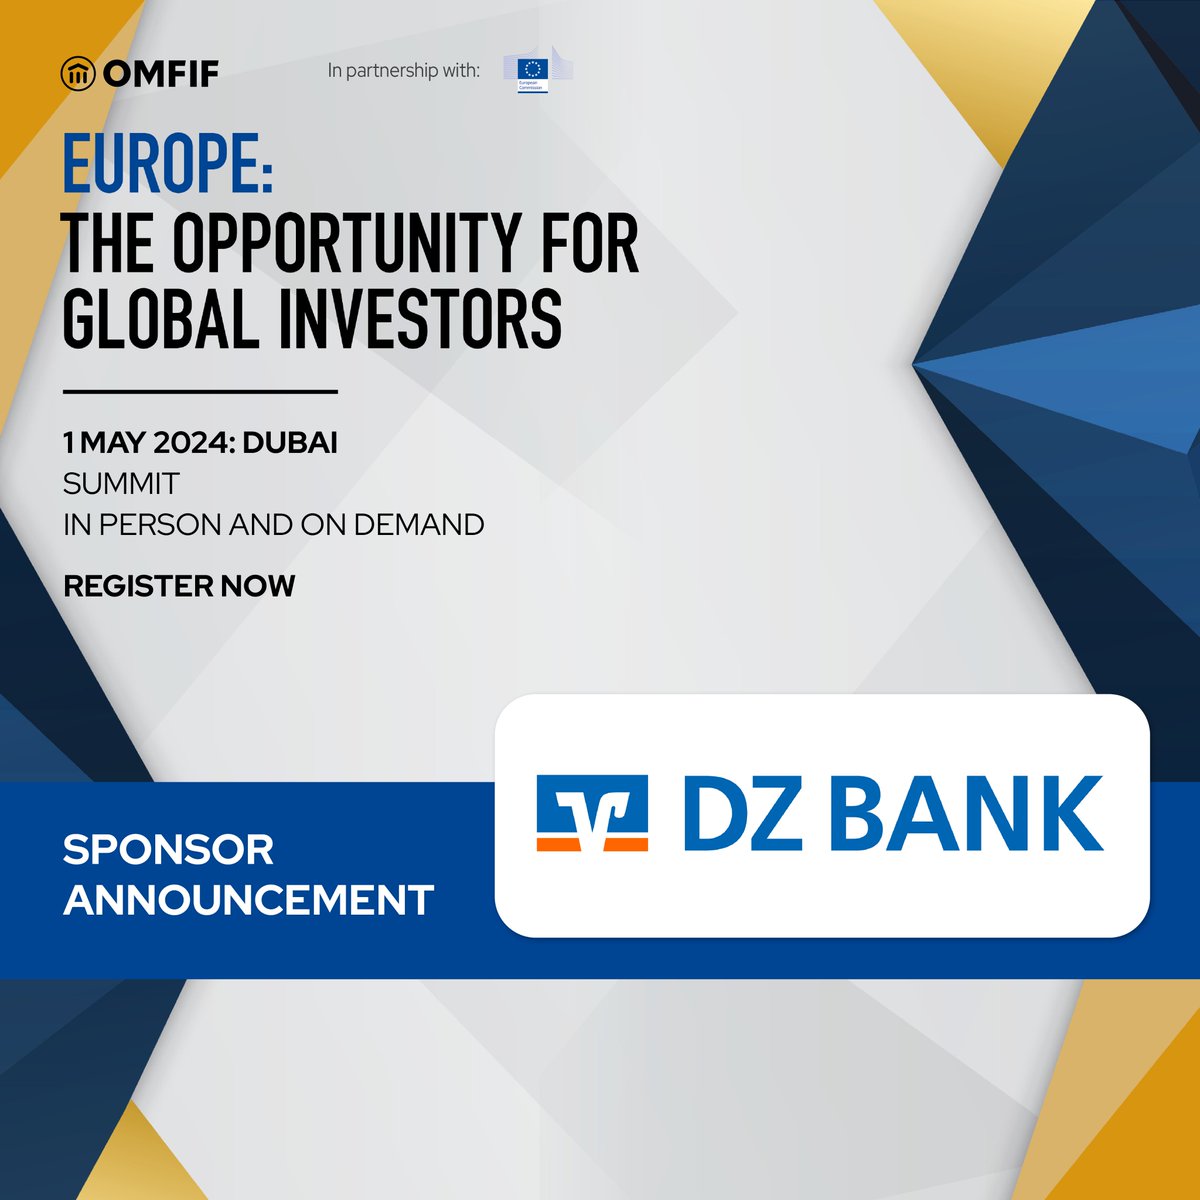 We are glad to announce @dzbank will partner with us on our EU bonds summits, taking place in Dubai and Singapore. @dzbank has been a special long-term member of OMFIF and long-standing supporter of our work with the @EU_Commission. Find out more: omfif.org/eu-bonds-creat…